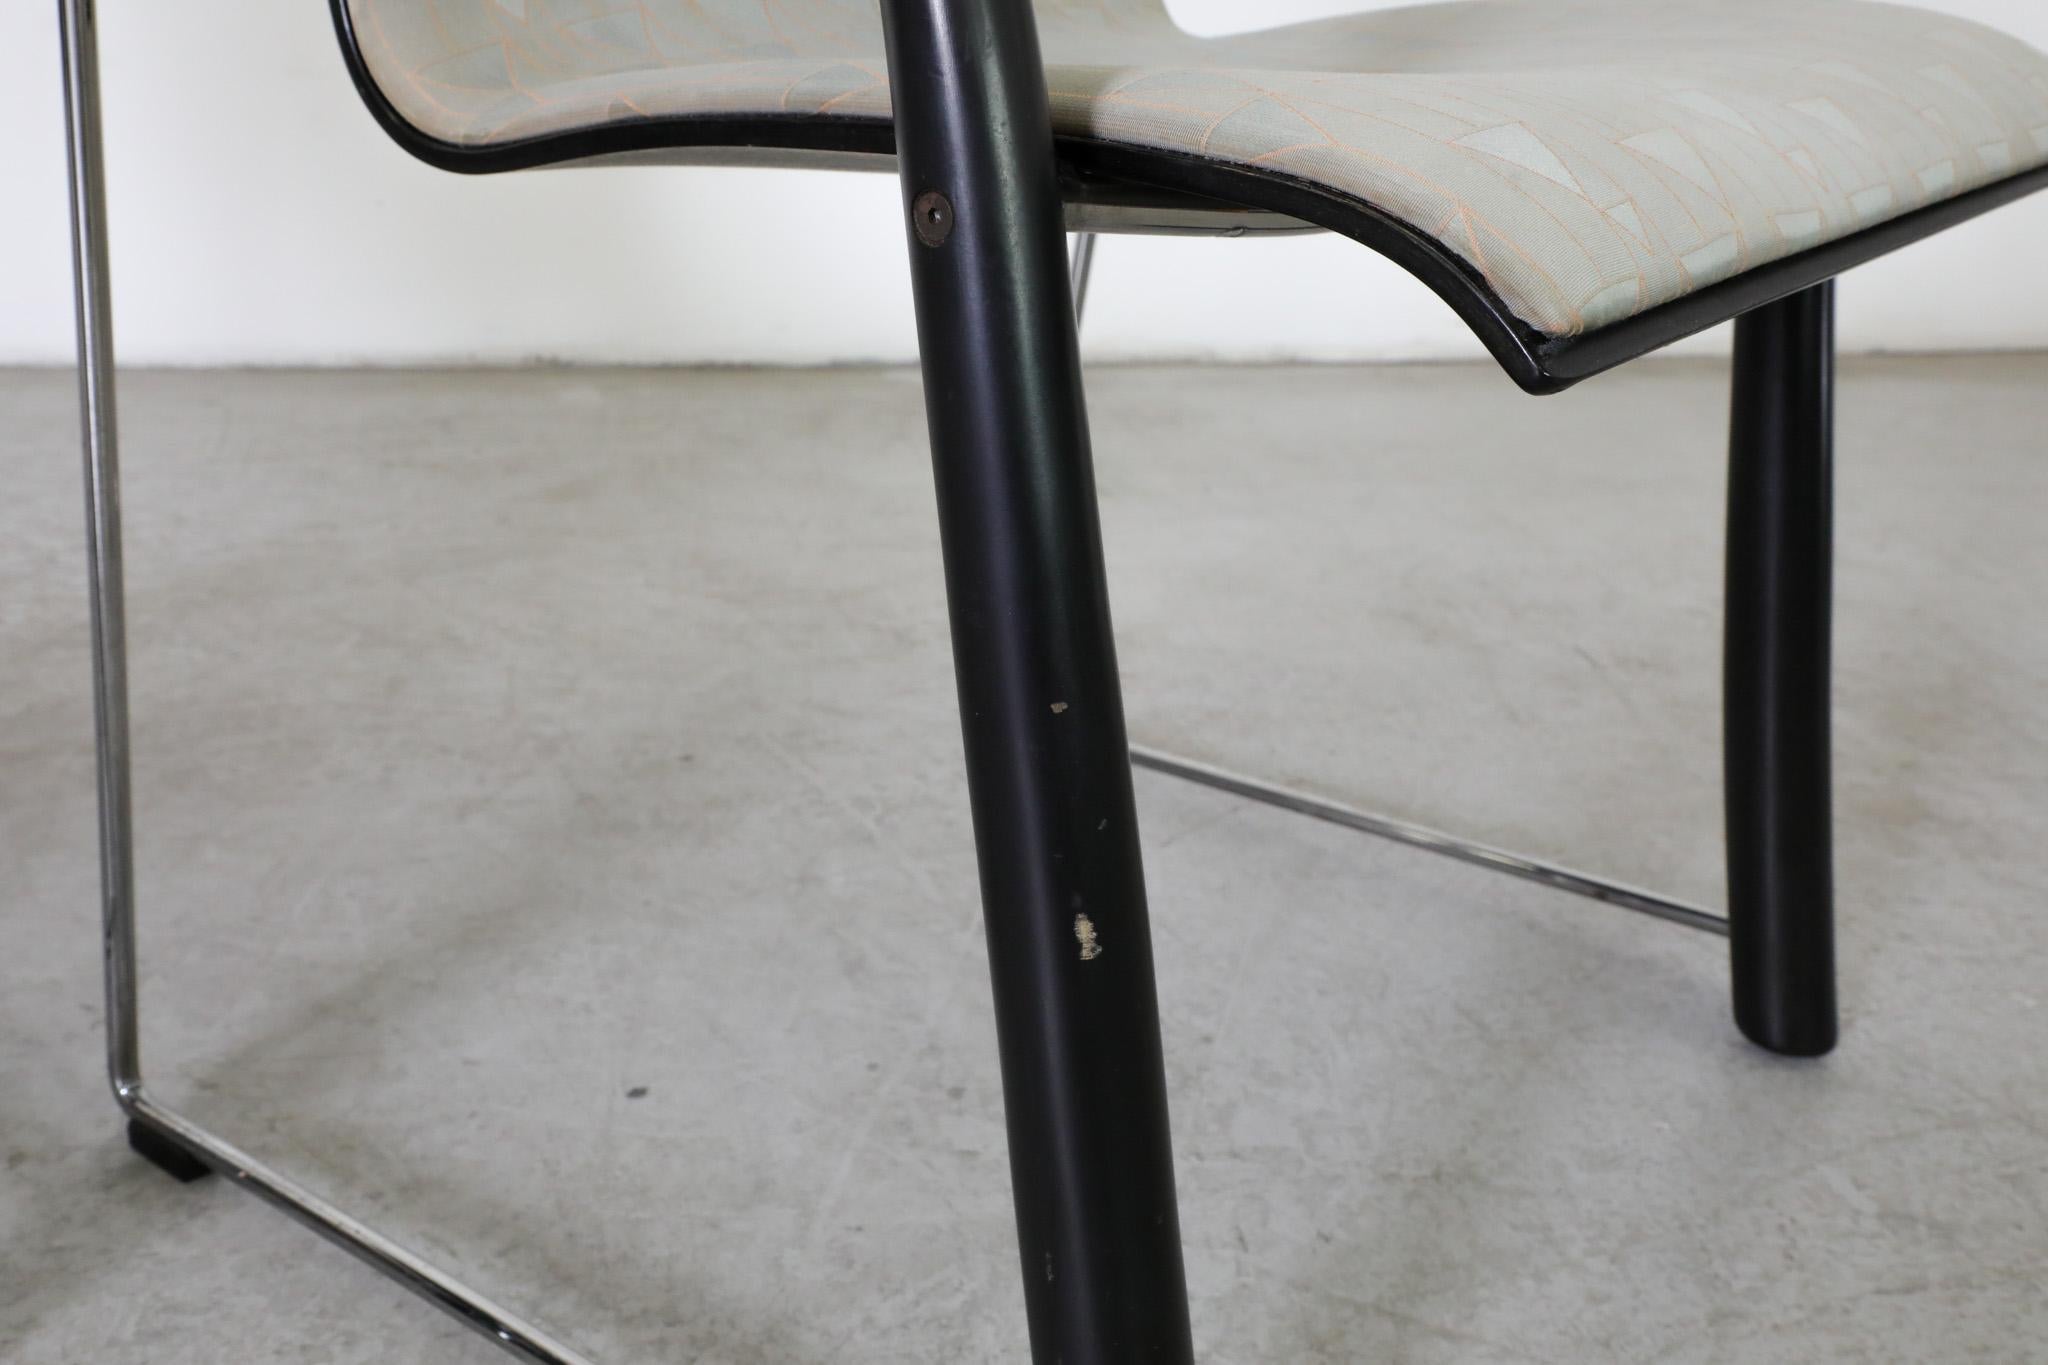 Pair of Thonet S320 by Wulf Schneider & Ulrich Böhme Chairs w/ Black Curved Arms For Sale 7